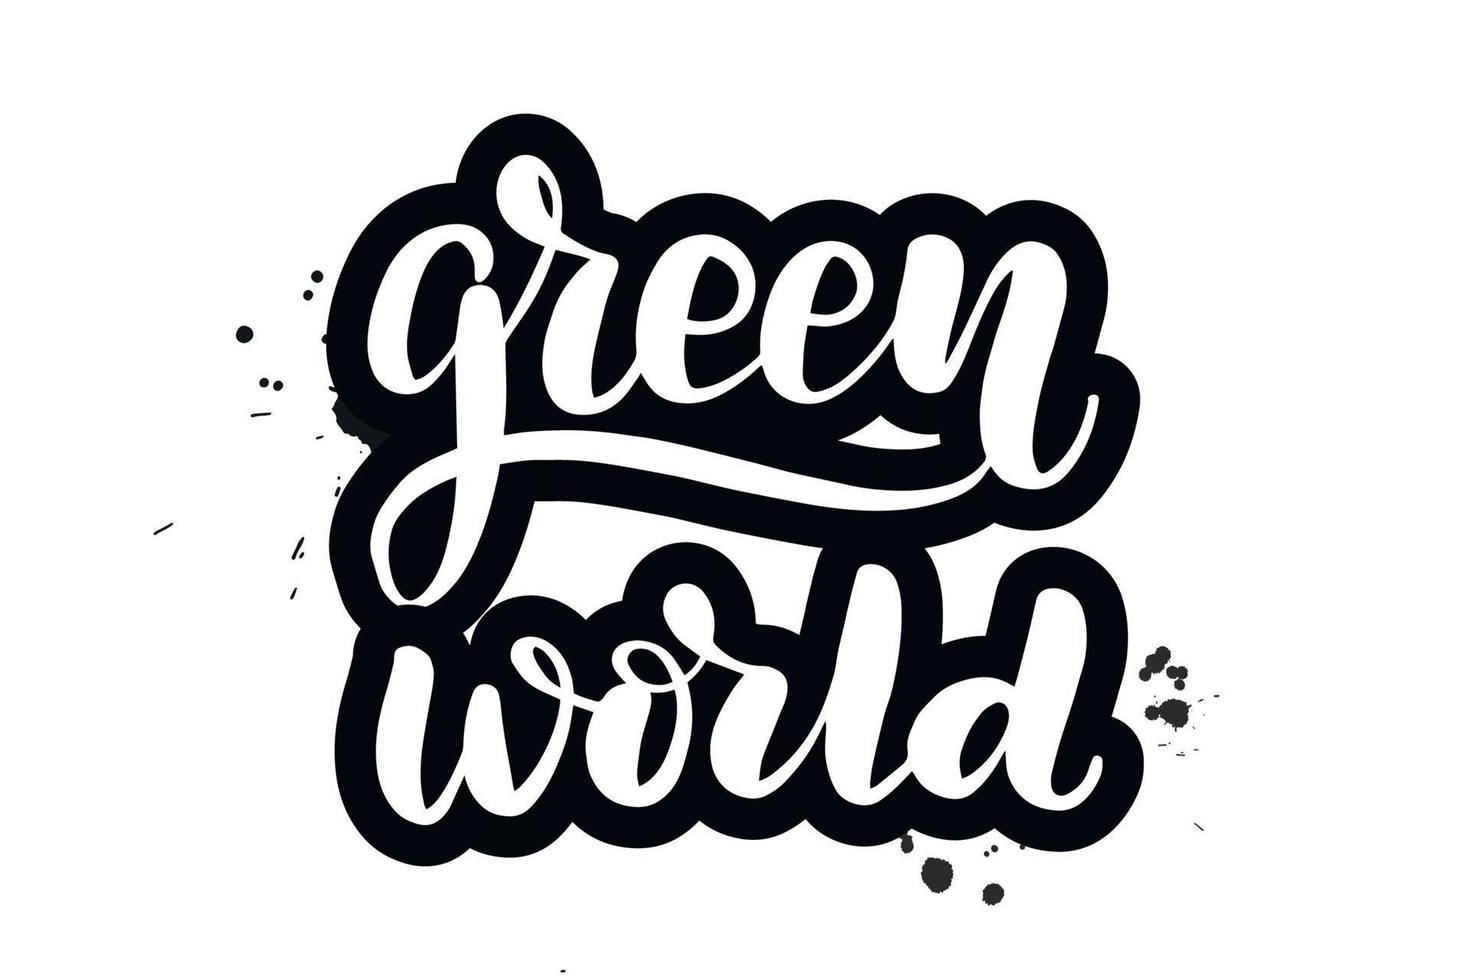 Inspirational handwritten brush lettering green world. Vector calligraphy illustration isolated on white background. Typography for banners, badges, postcard, tshirt, prints, posters.